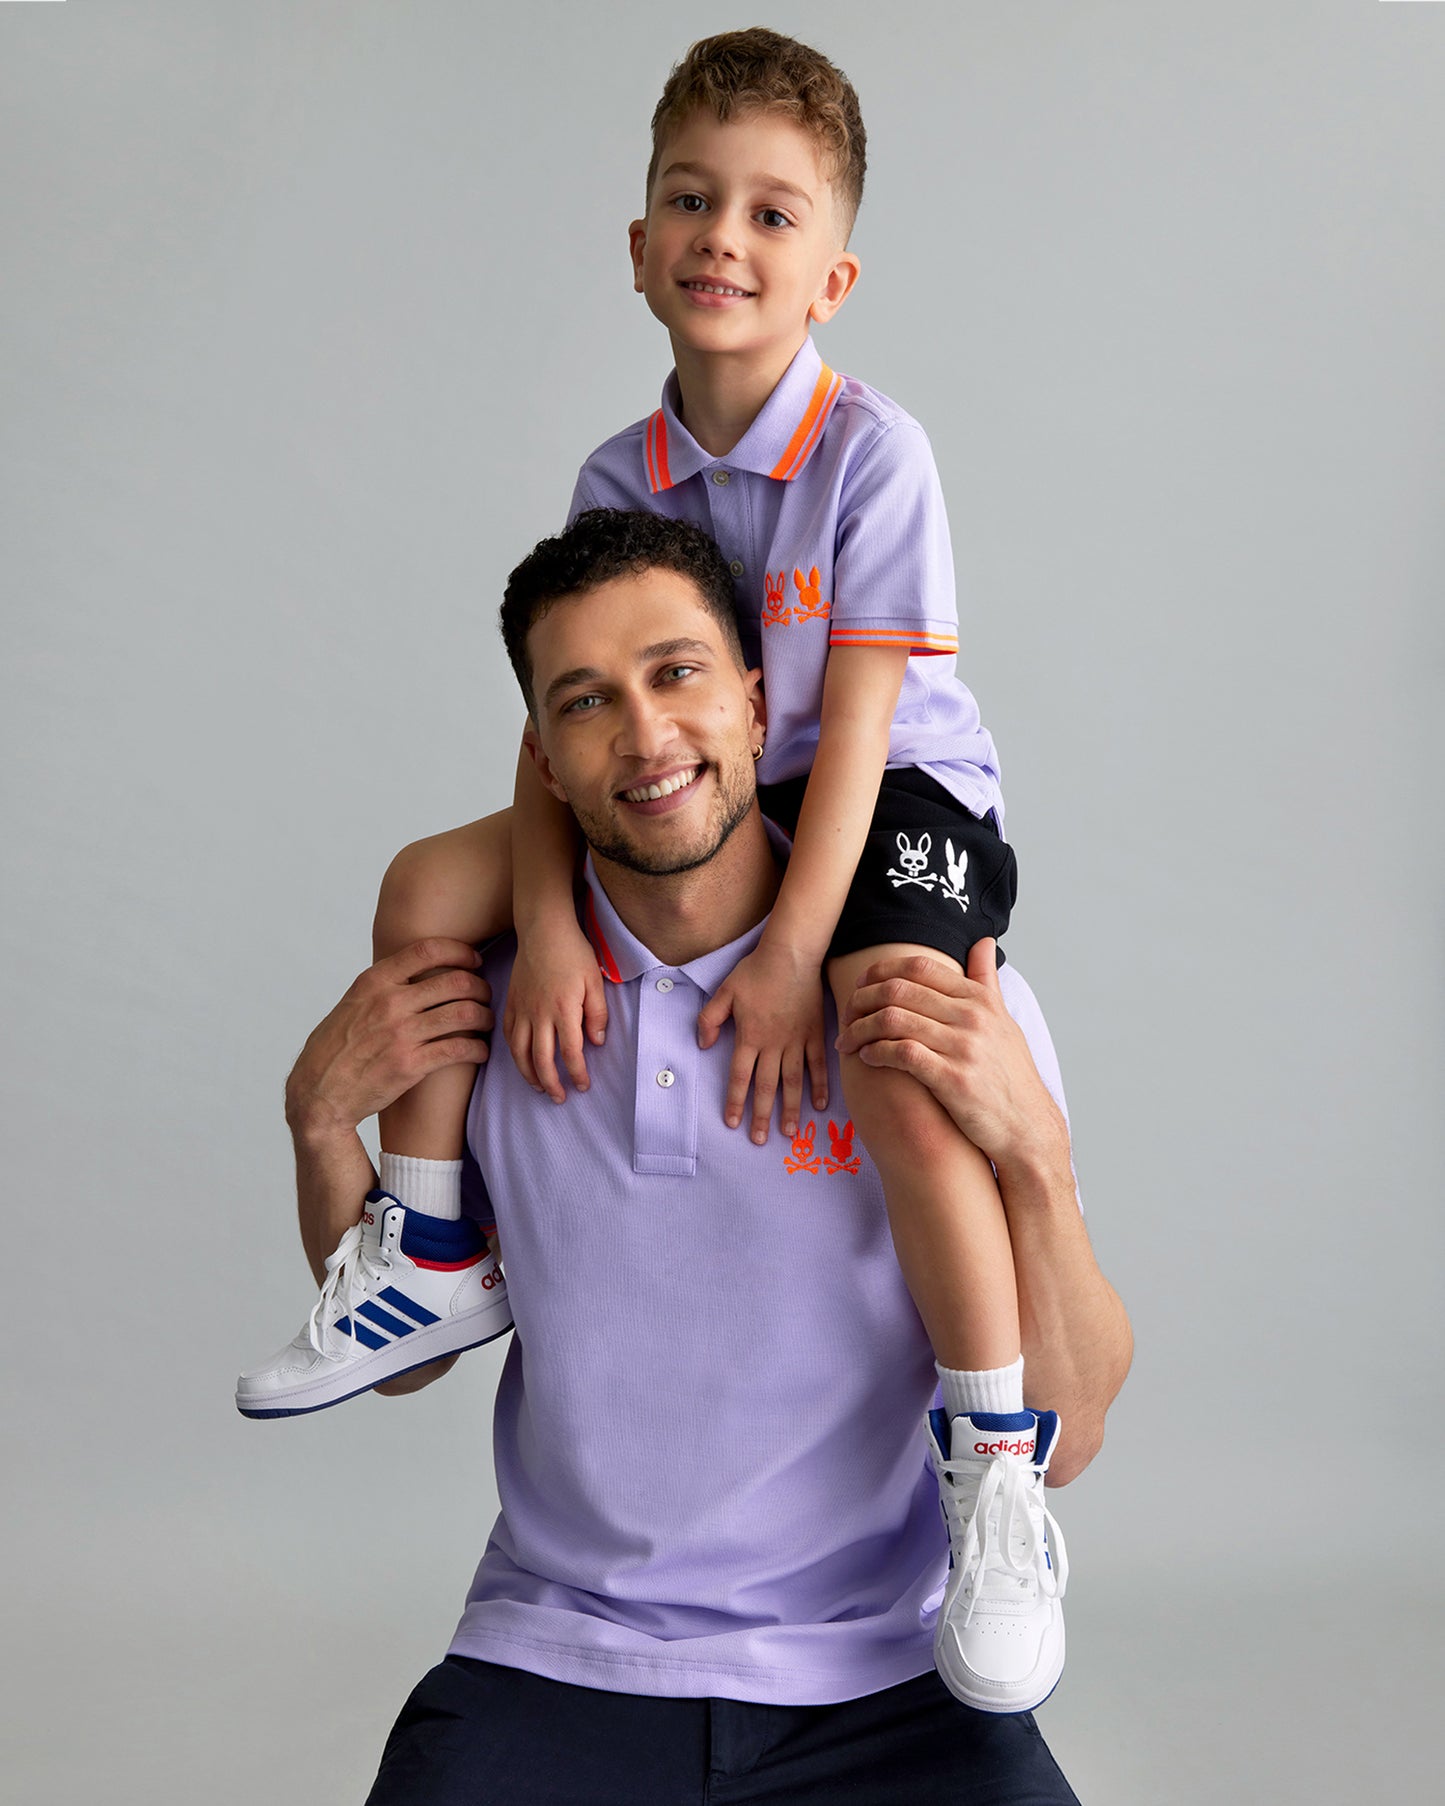 King's Child Polo – King's Child Apparel